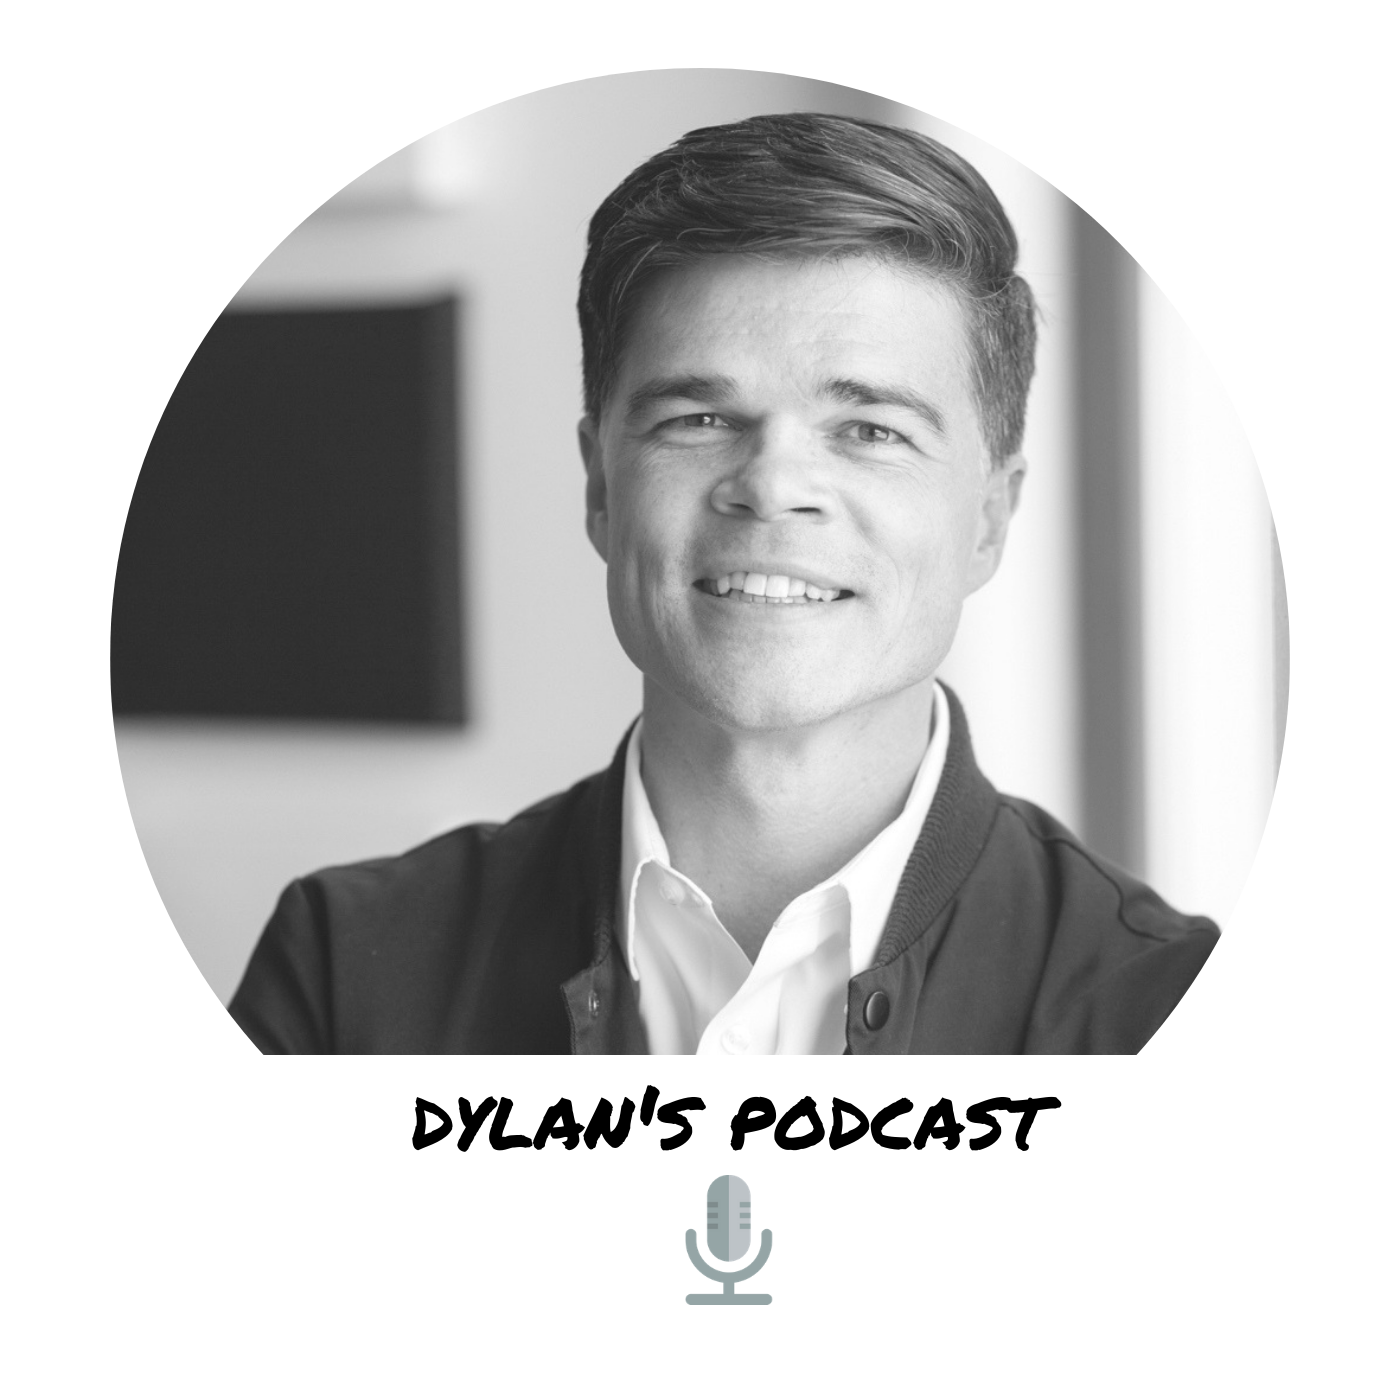 dylan’s podcast